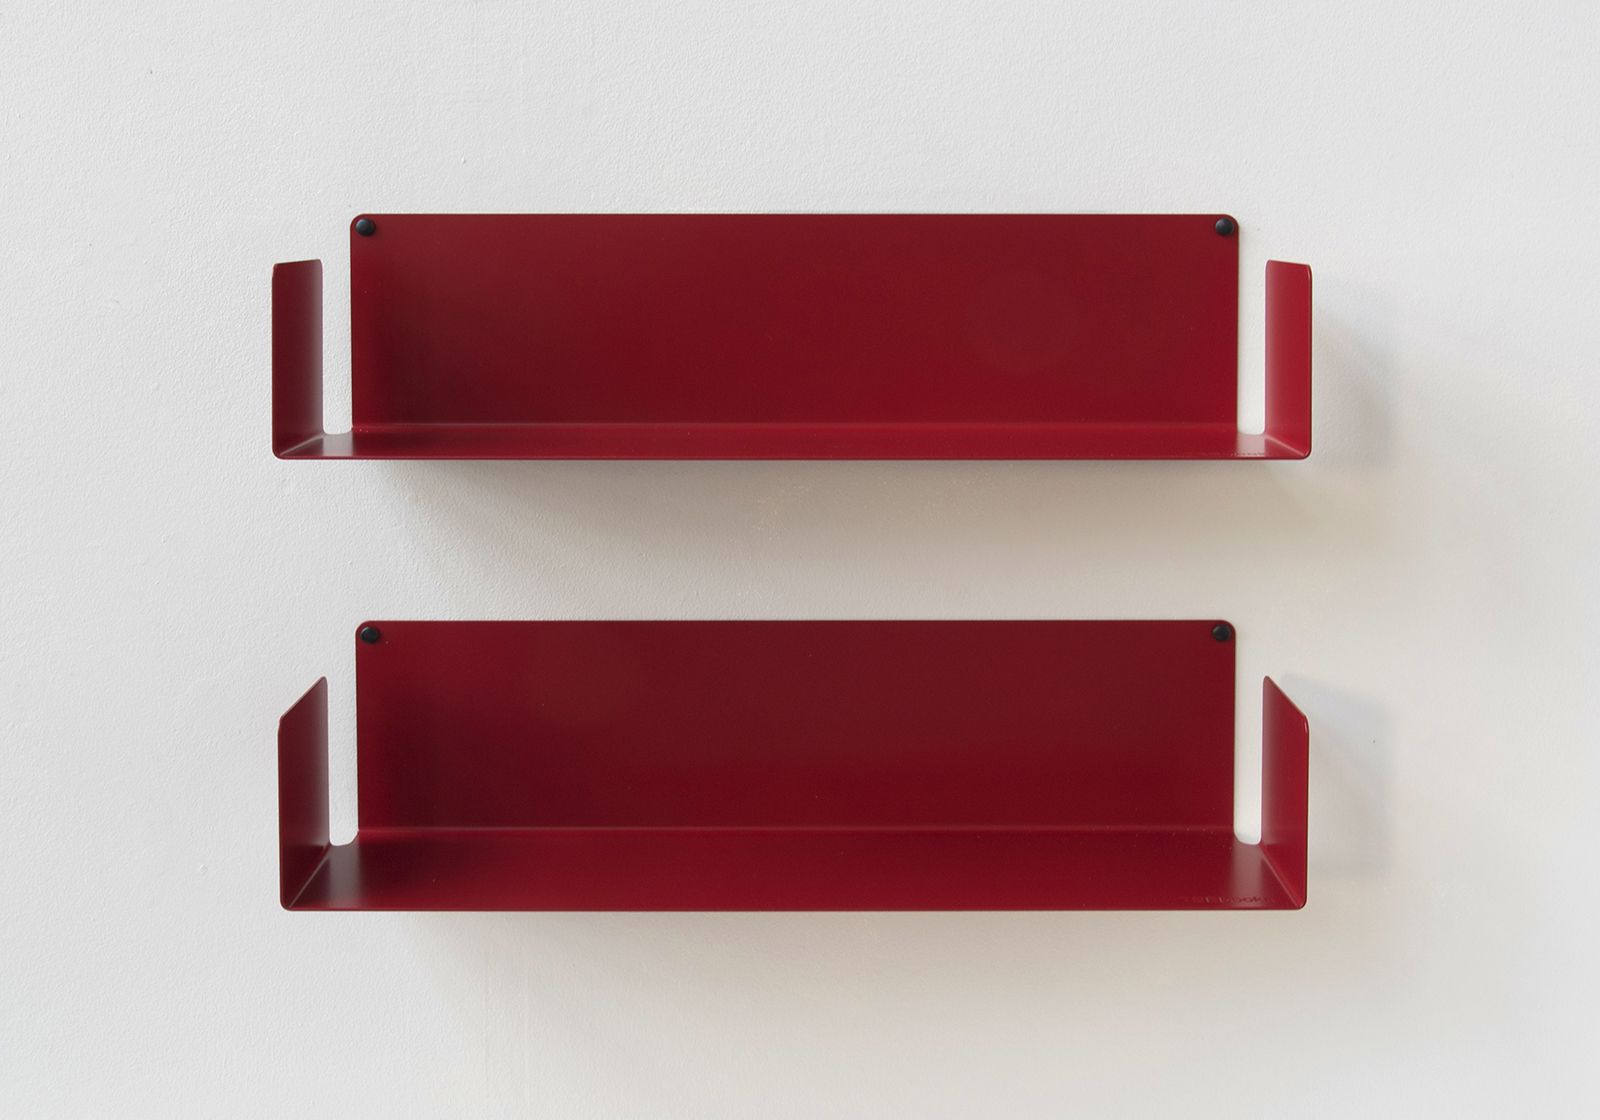 floating shelves set red marble top kitchen island with seating inch white wall shelf black pegs over desk garage storage cabinets drawers metal angle support table glass display